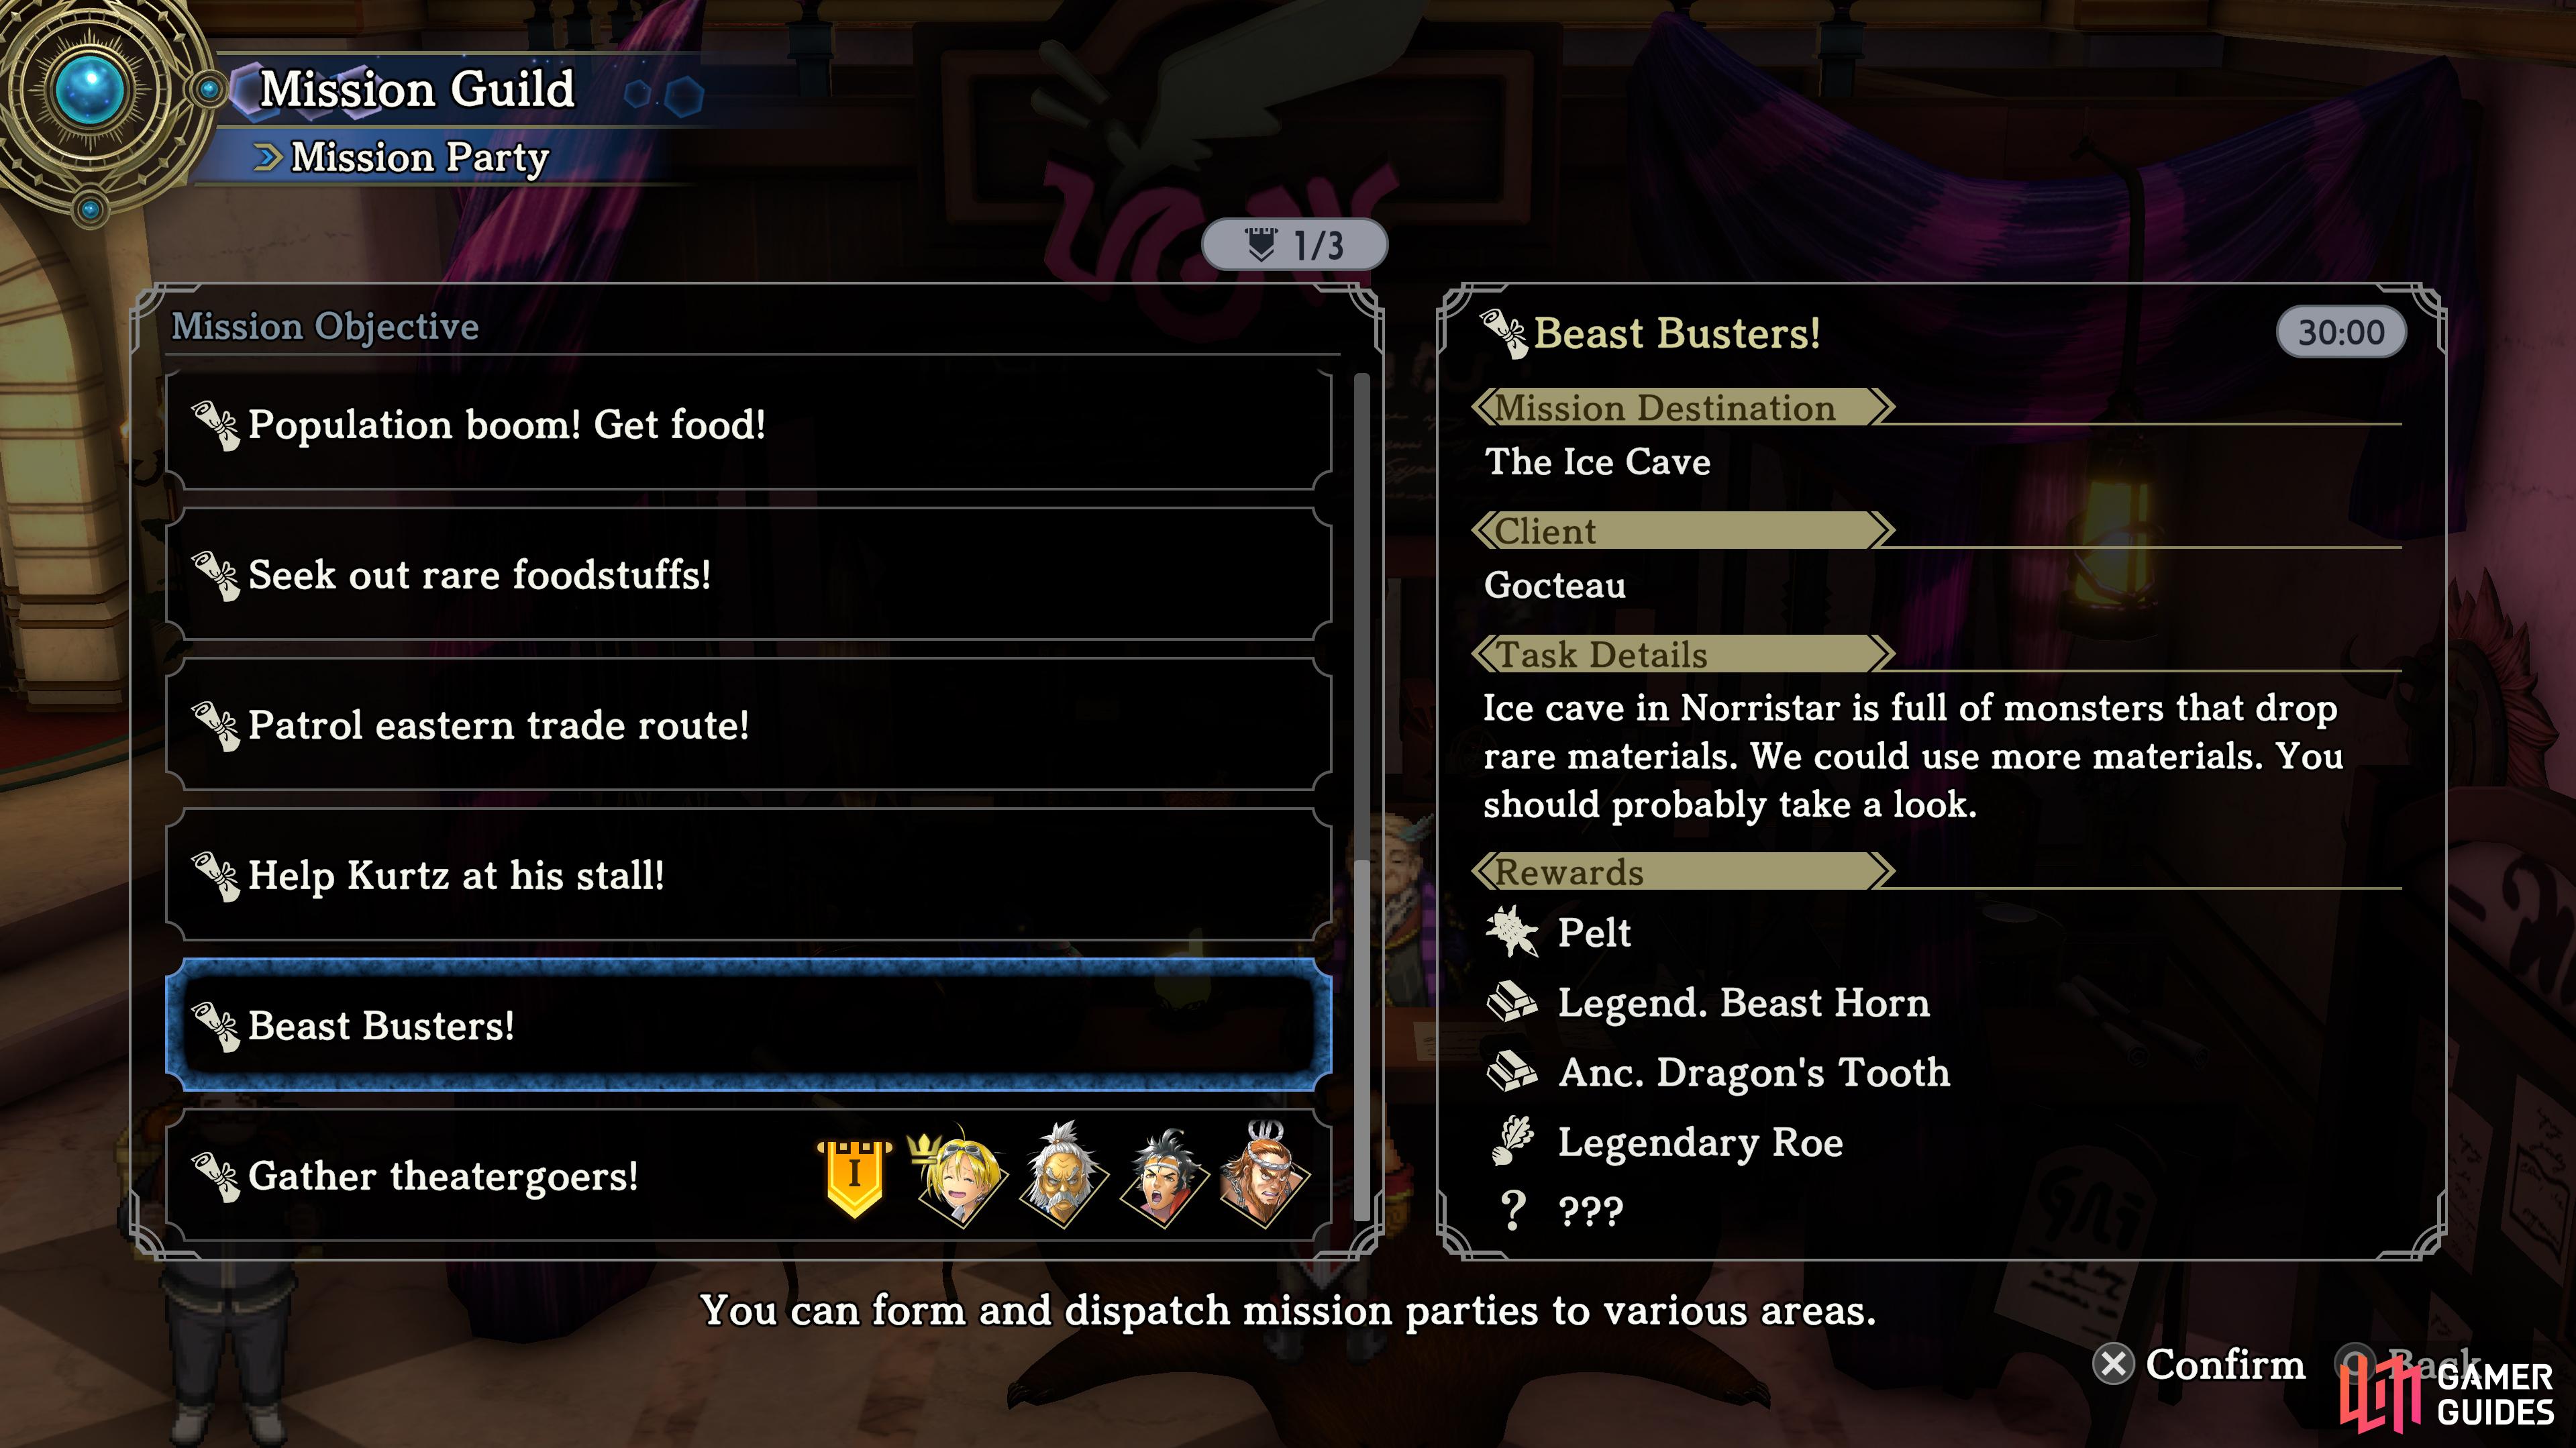 Ancient Dragon Tooth is only obtainable by repeating the Beast Busters! mission in the Mission Guild.